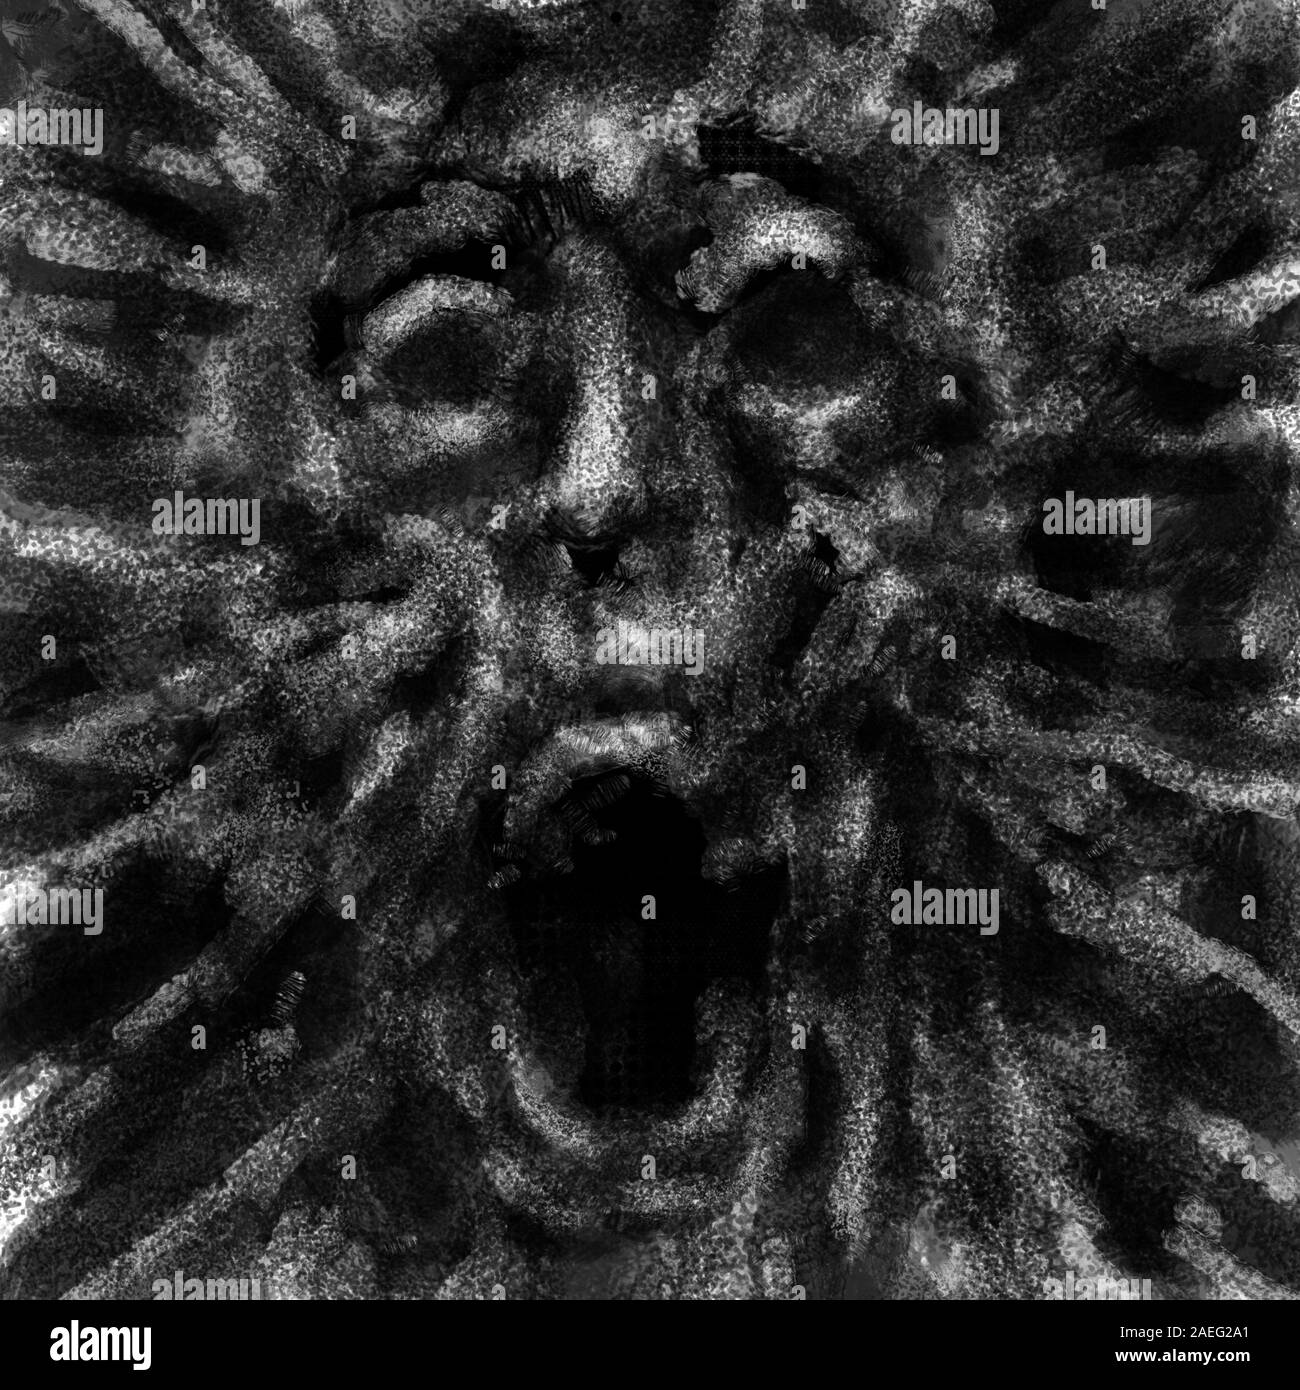 Exploding human face with opened mouth. Black and white illustration in horror genre with coal and noise effect Stock Photo